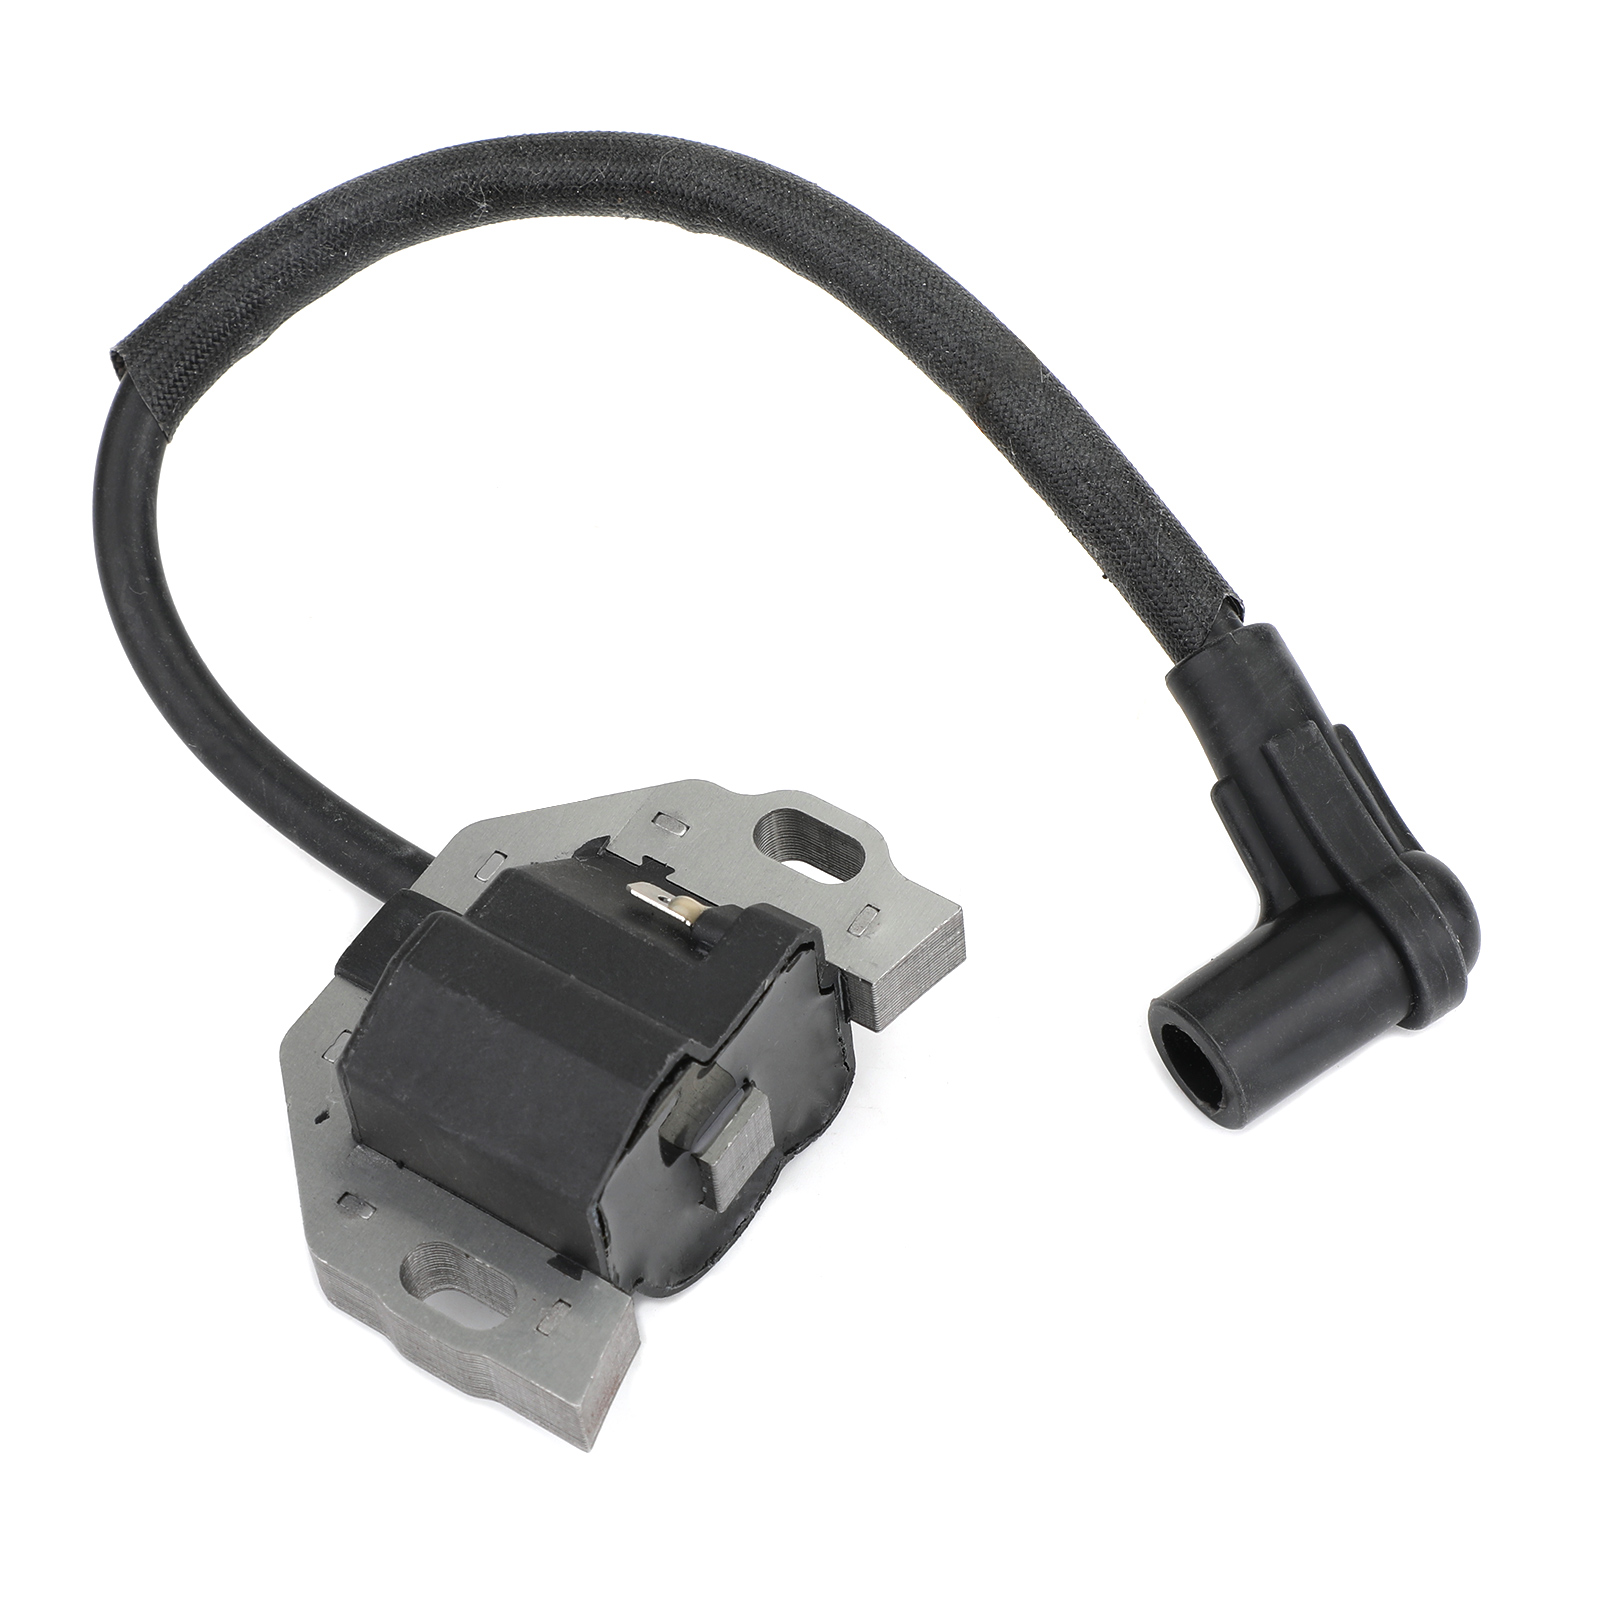 Motor Genic Ignition Coil Fit For Kawasaki 21171-0745 21171-0742 21171-7039 ZF-IG-A00135 - image 3 of 9